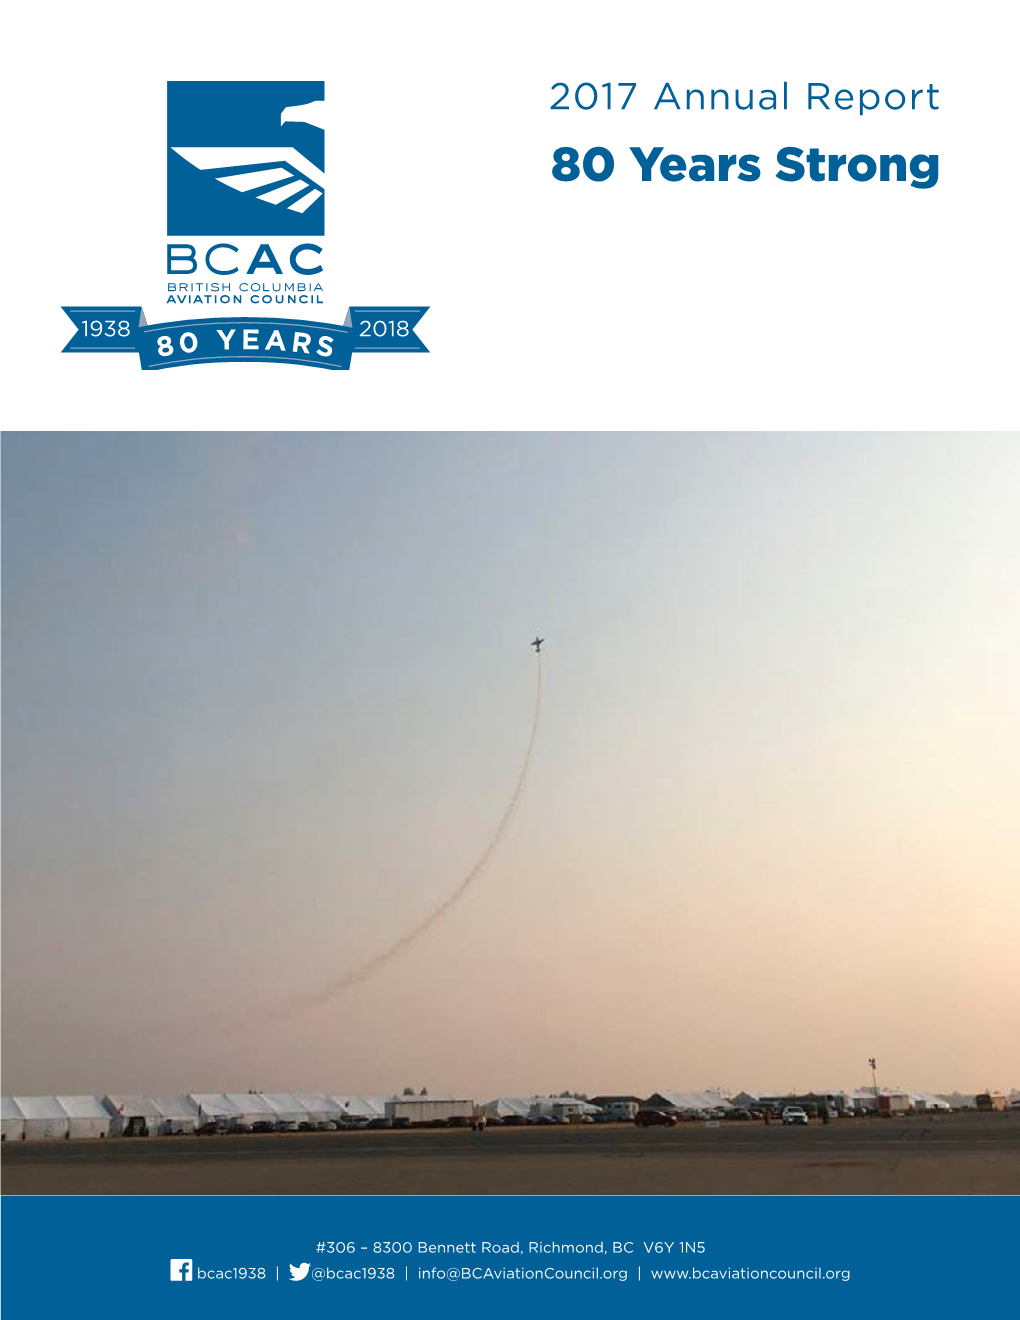 2017 Annual Report 80 Years Strong